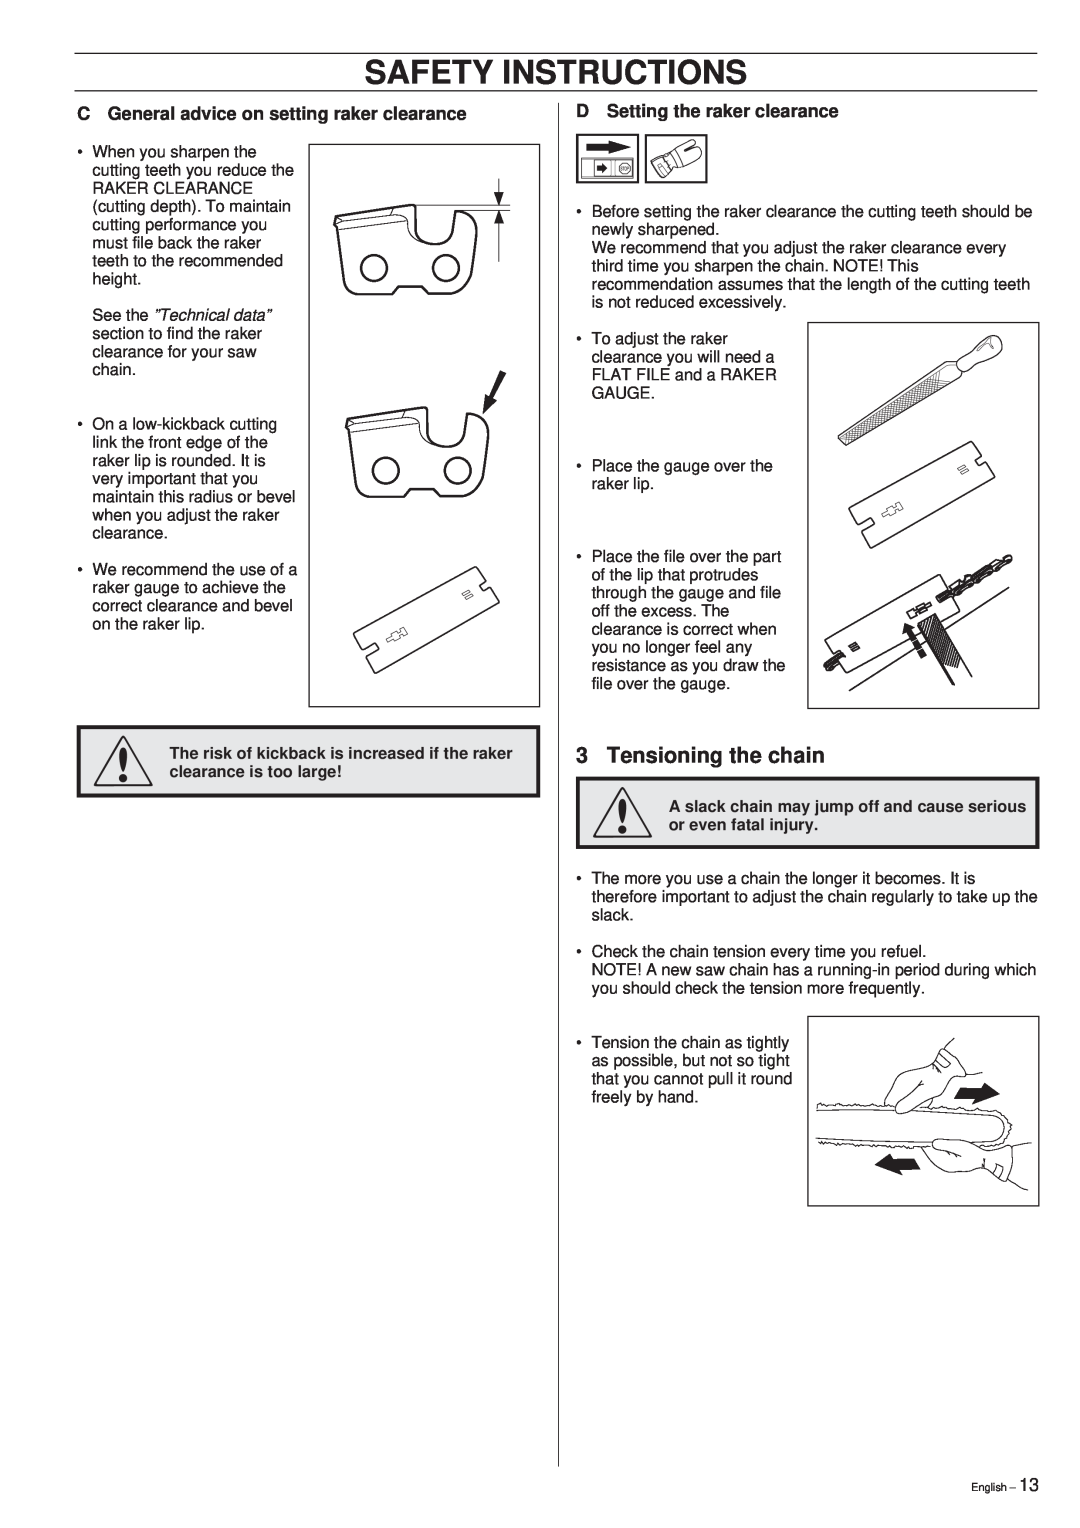 Husqvarna 45 manual Safety Instructions, 3Tensioning the chain, C General advice on setting raker clearance 